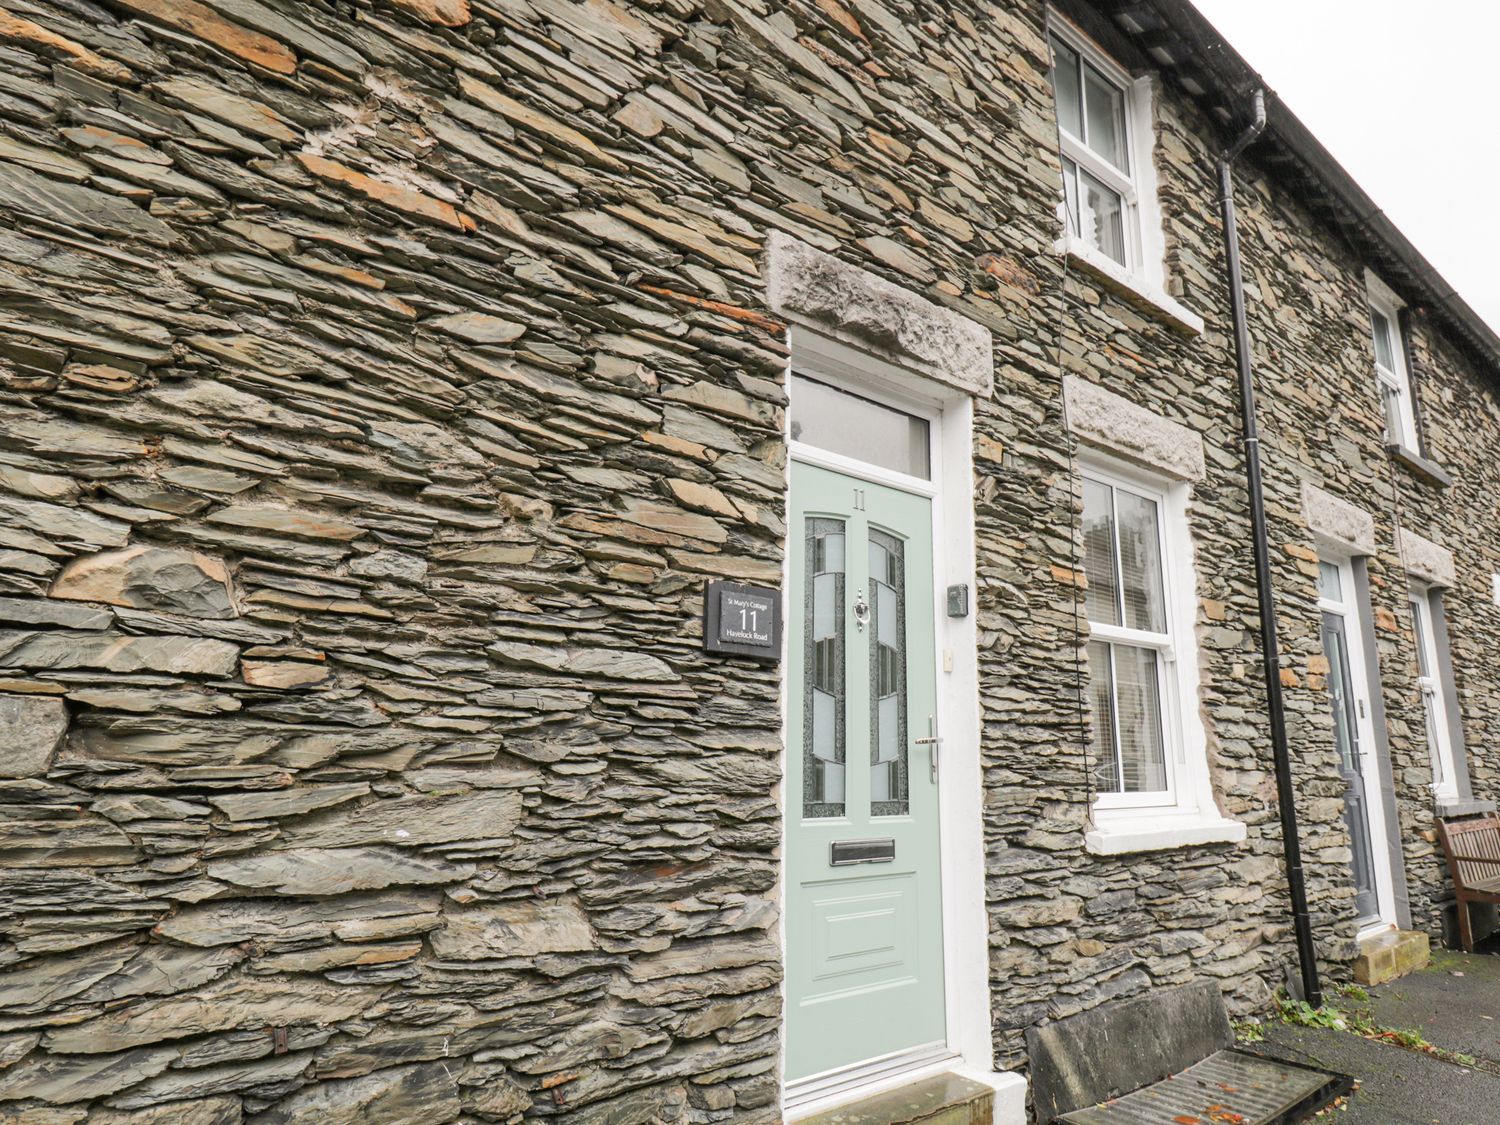 St Mary's Cottage - Lake District - 1010723 - photo 1